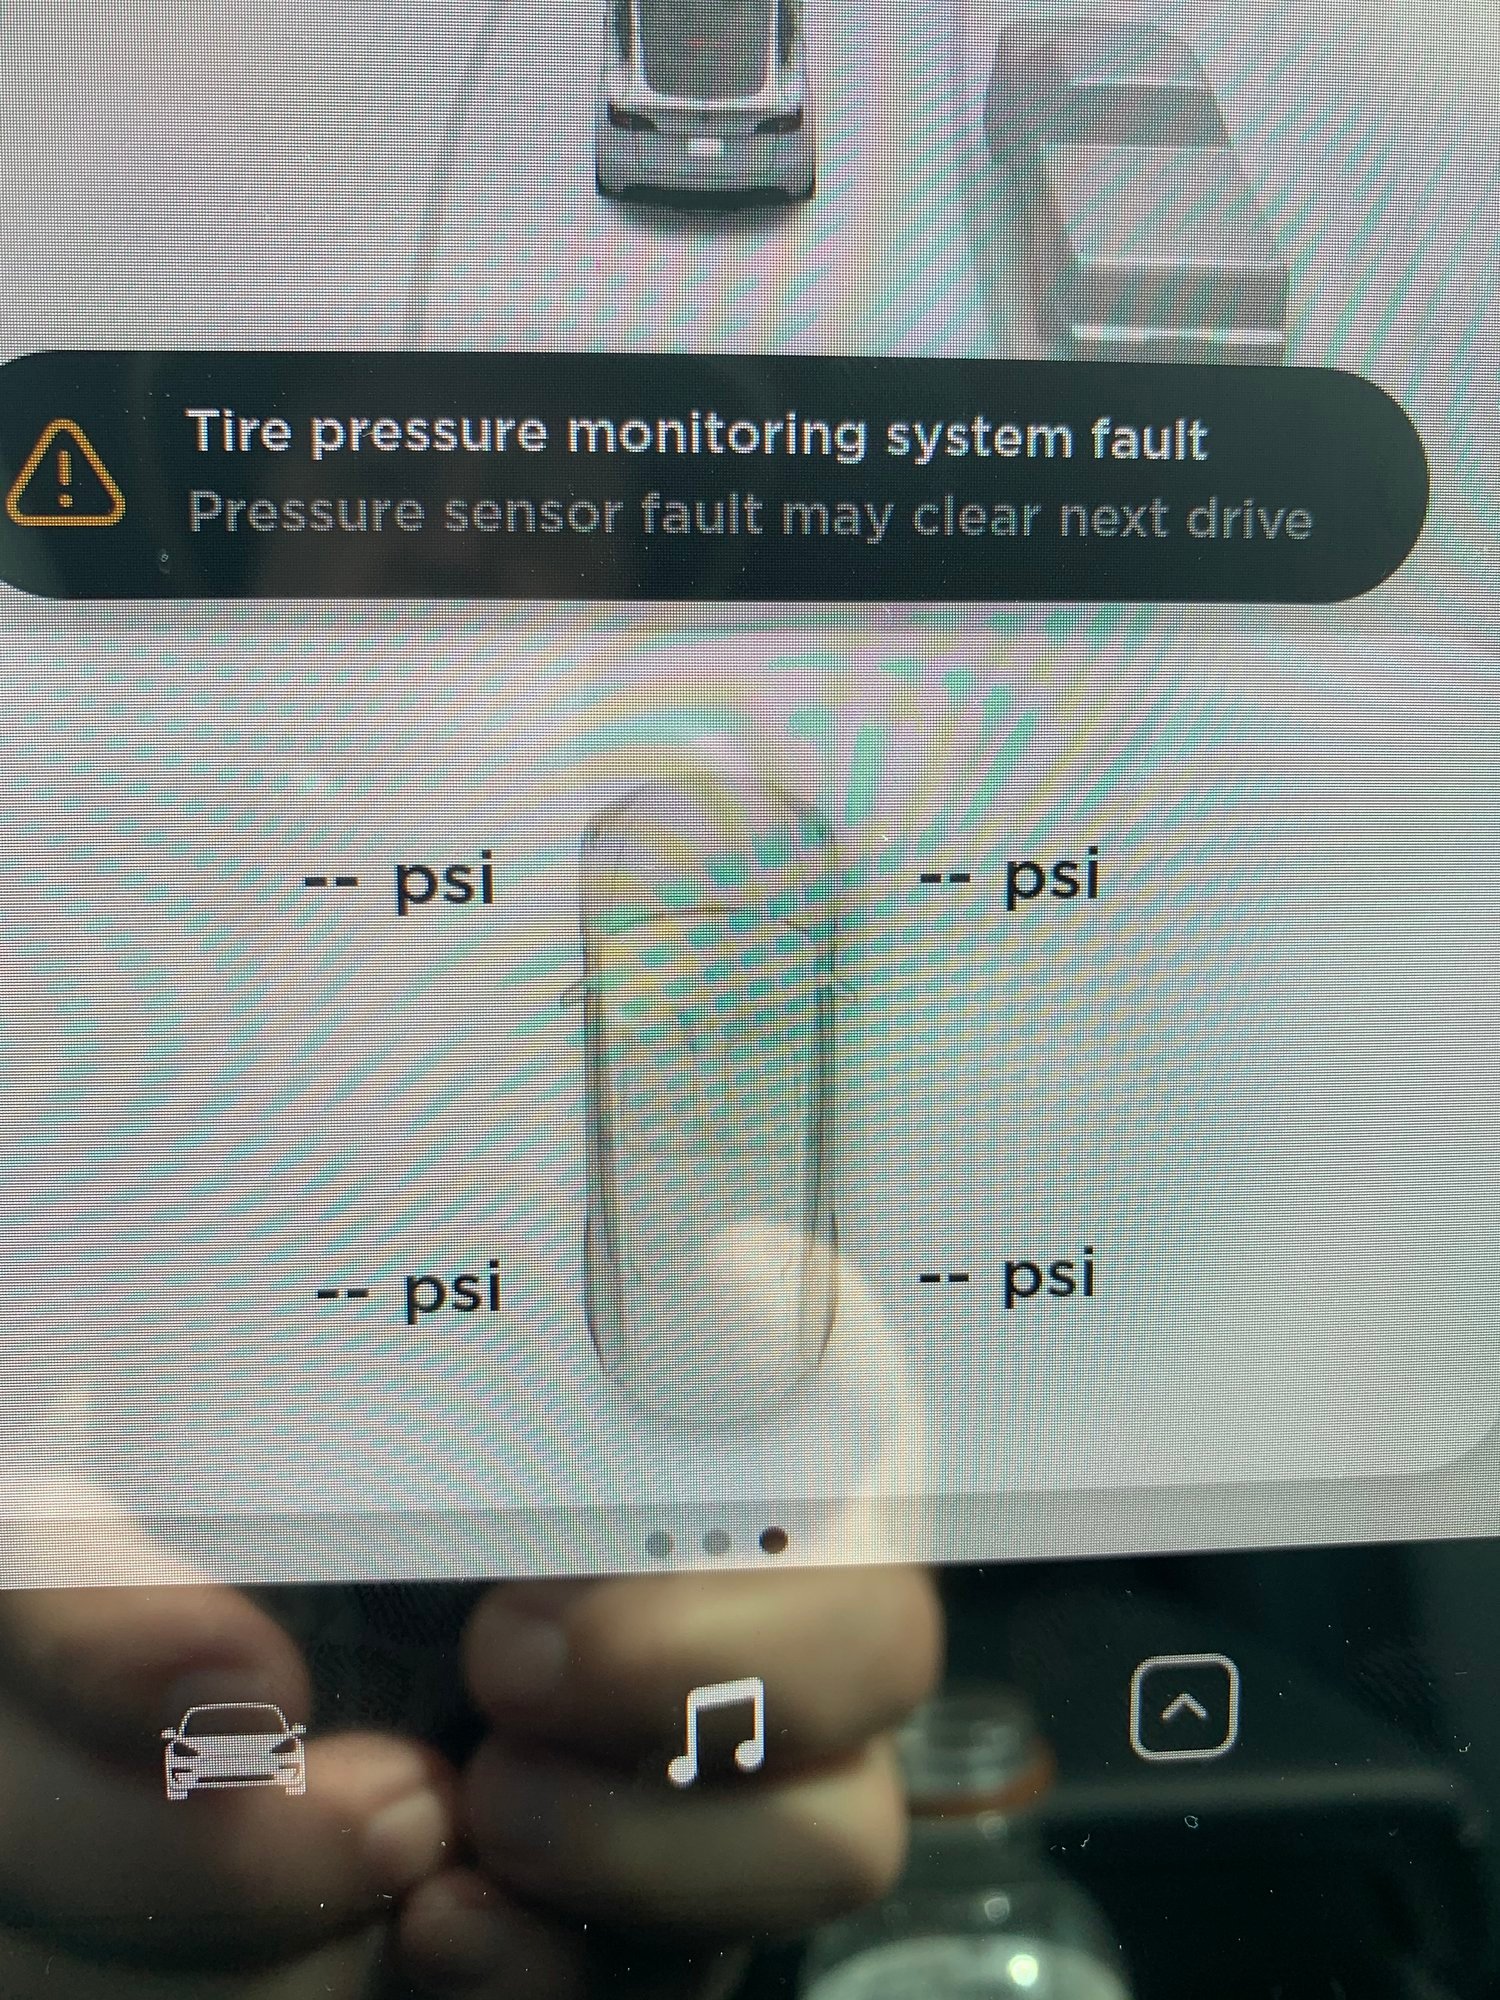 How to use Tire Pressure Monitoring System (TPMS) -Guide and Tutorial 